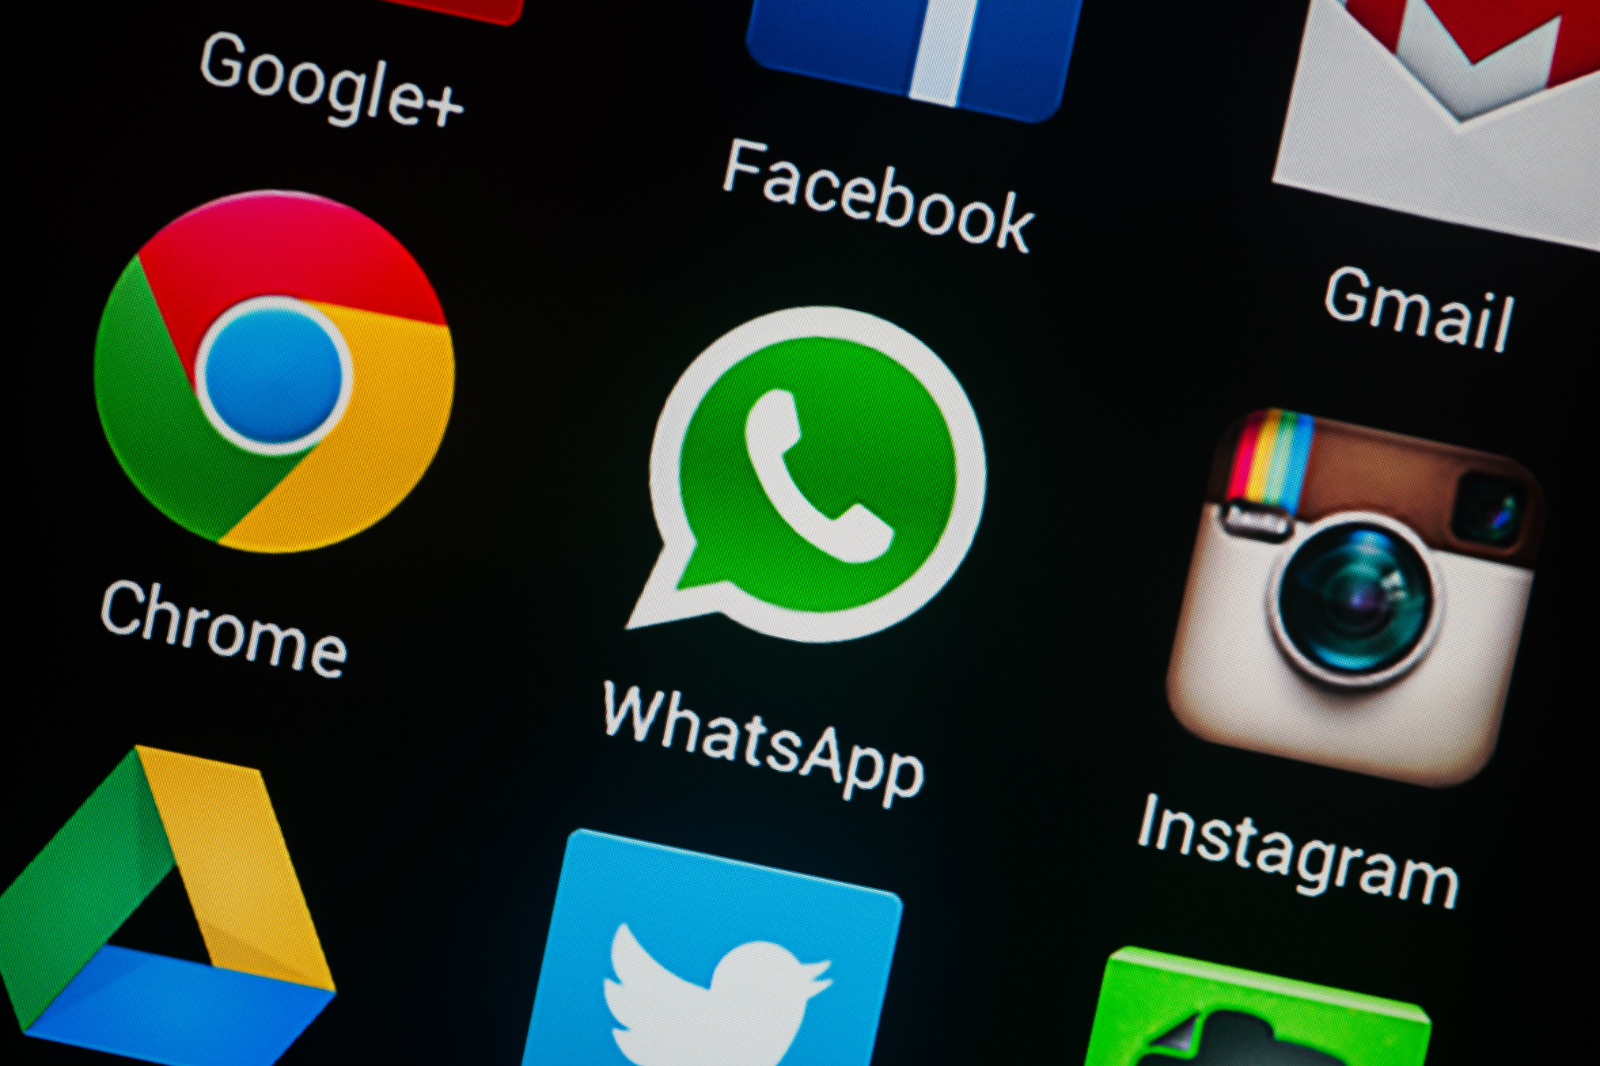 WhatsApp User Data Collection Software.